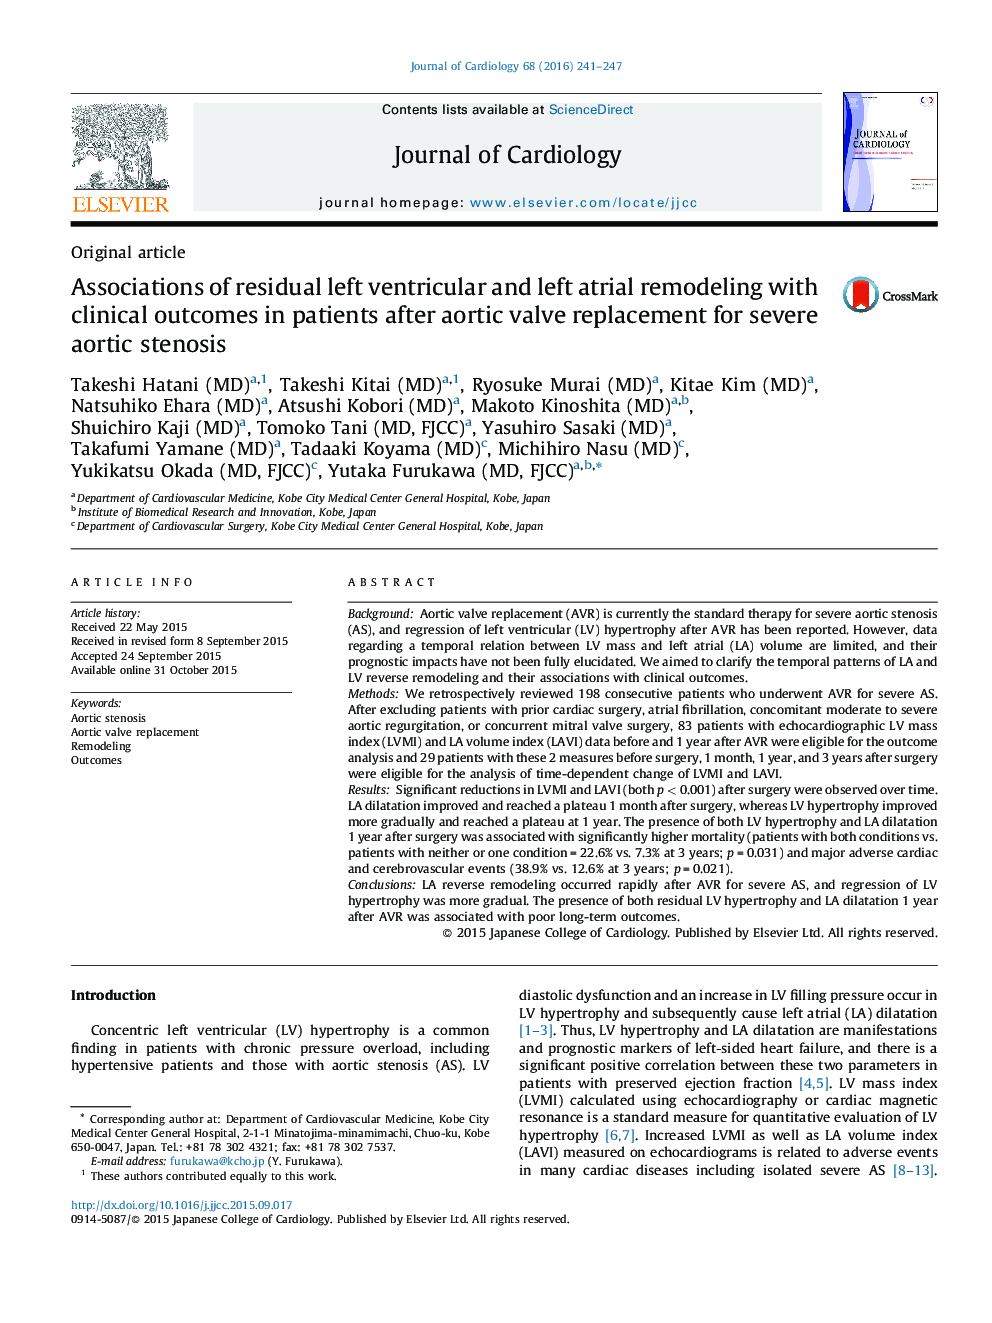 Associations of residual left ventricular and left atrial remodeling with clinical outcomes in patients after aortic valve replacement for severe aortic stenosis